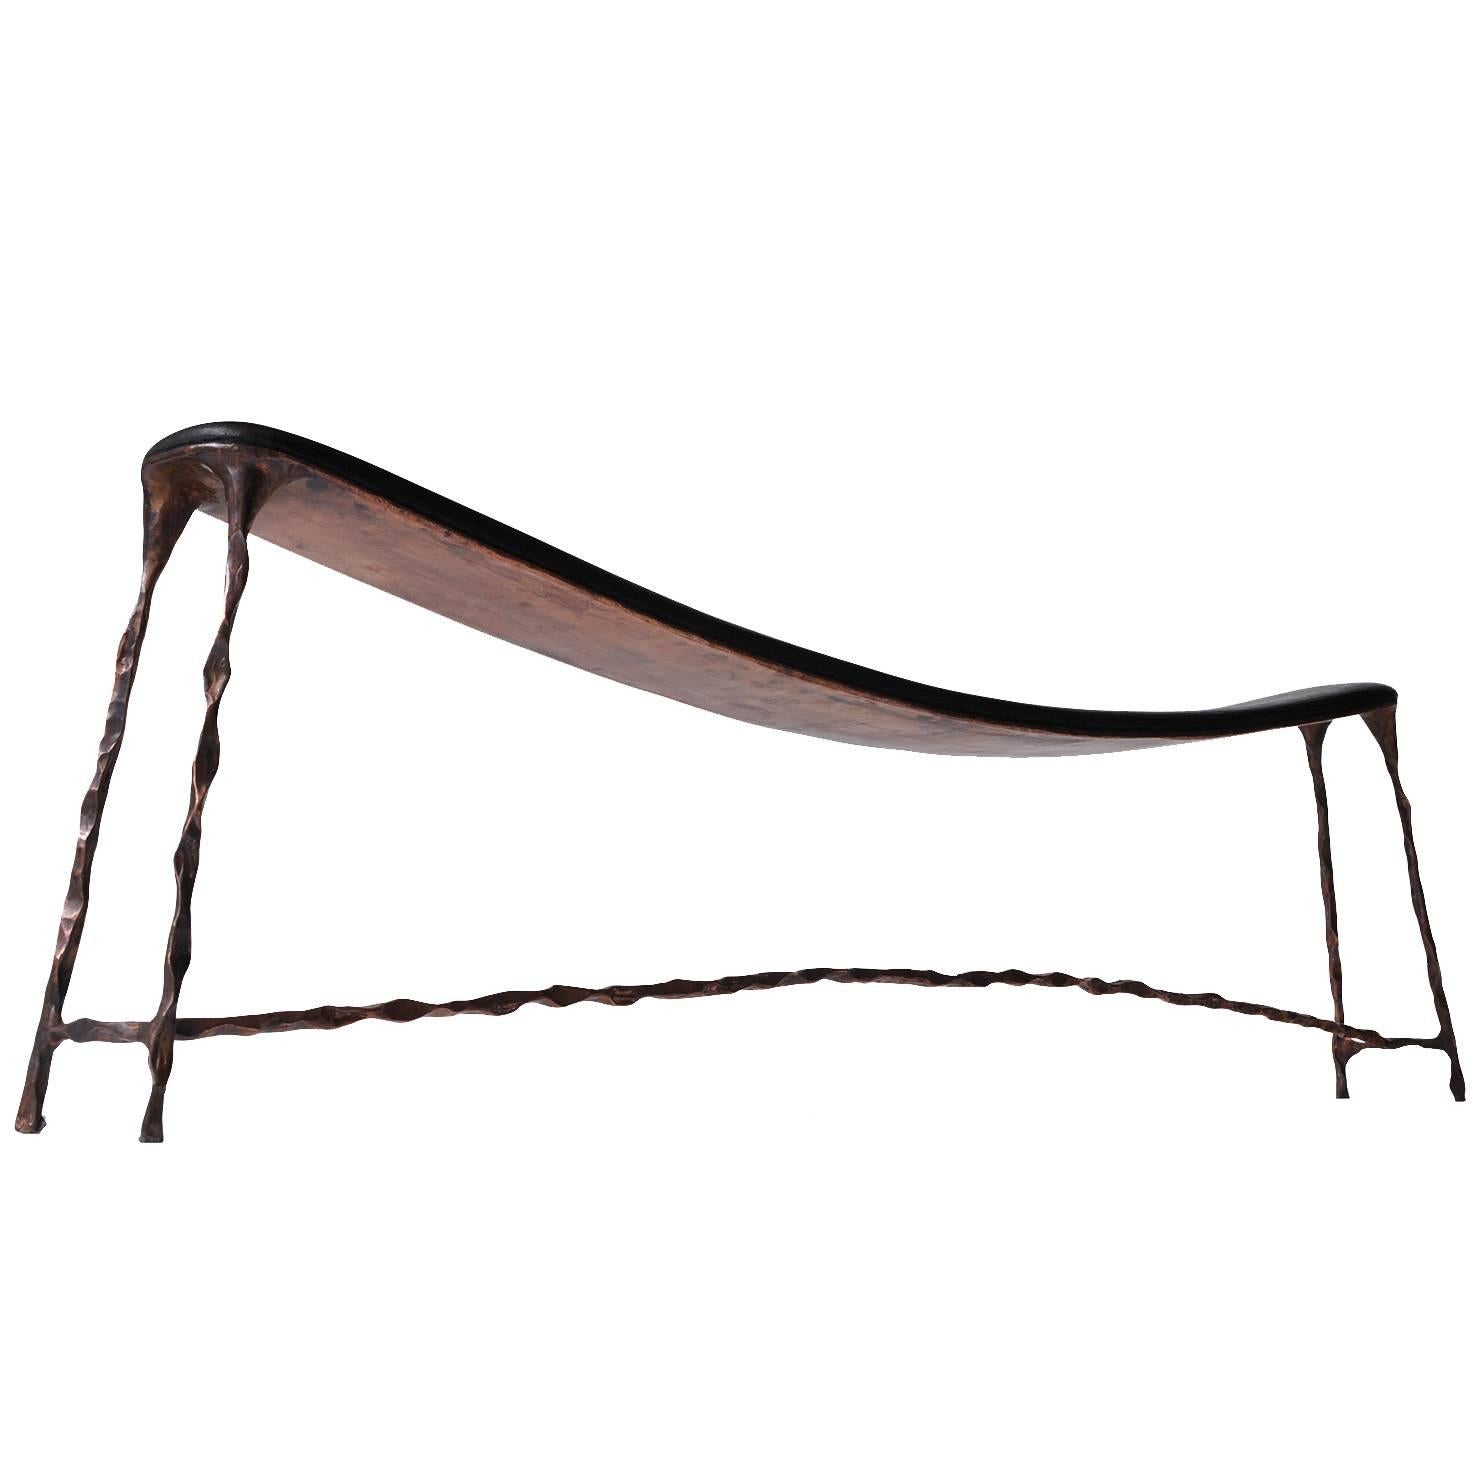 Large Bended Copper Bench by Valentin Loellmann